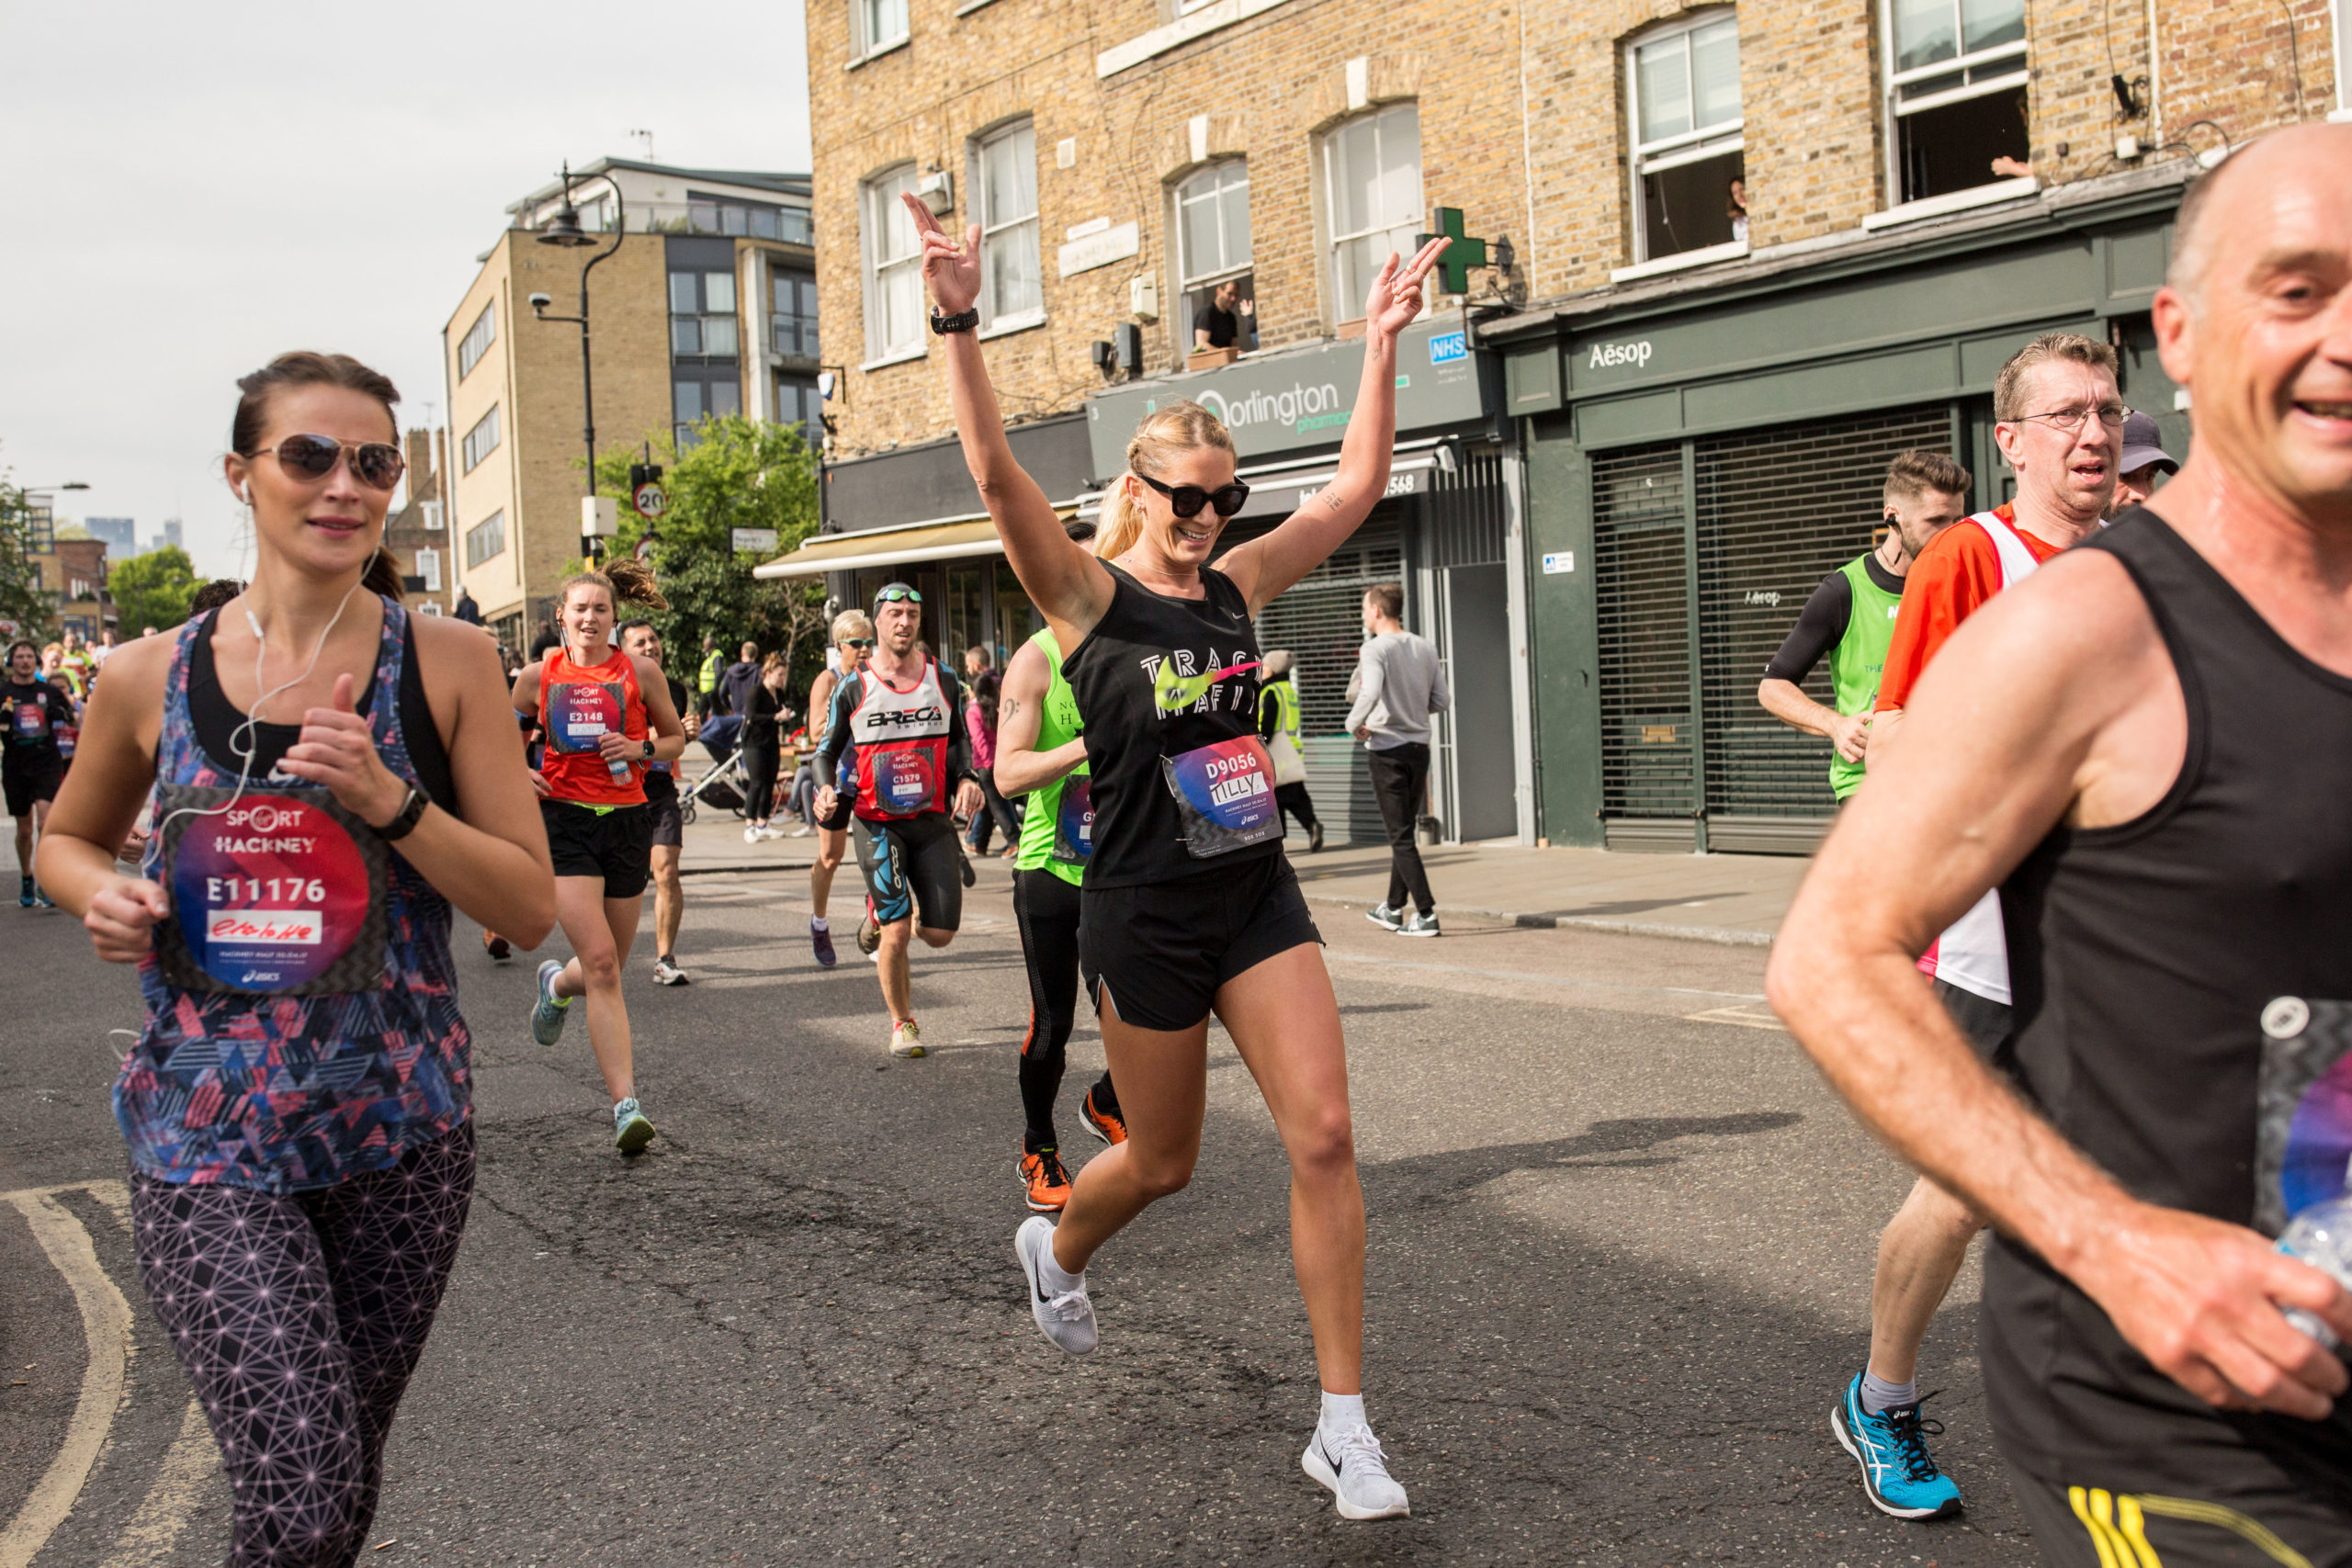 A lady in a black vest running in a street, holding her hands up while surrounded by other runners.